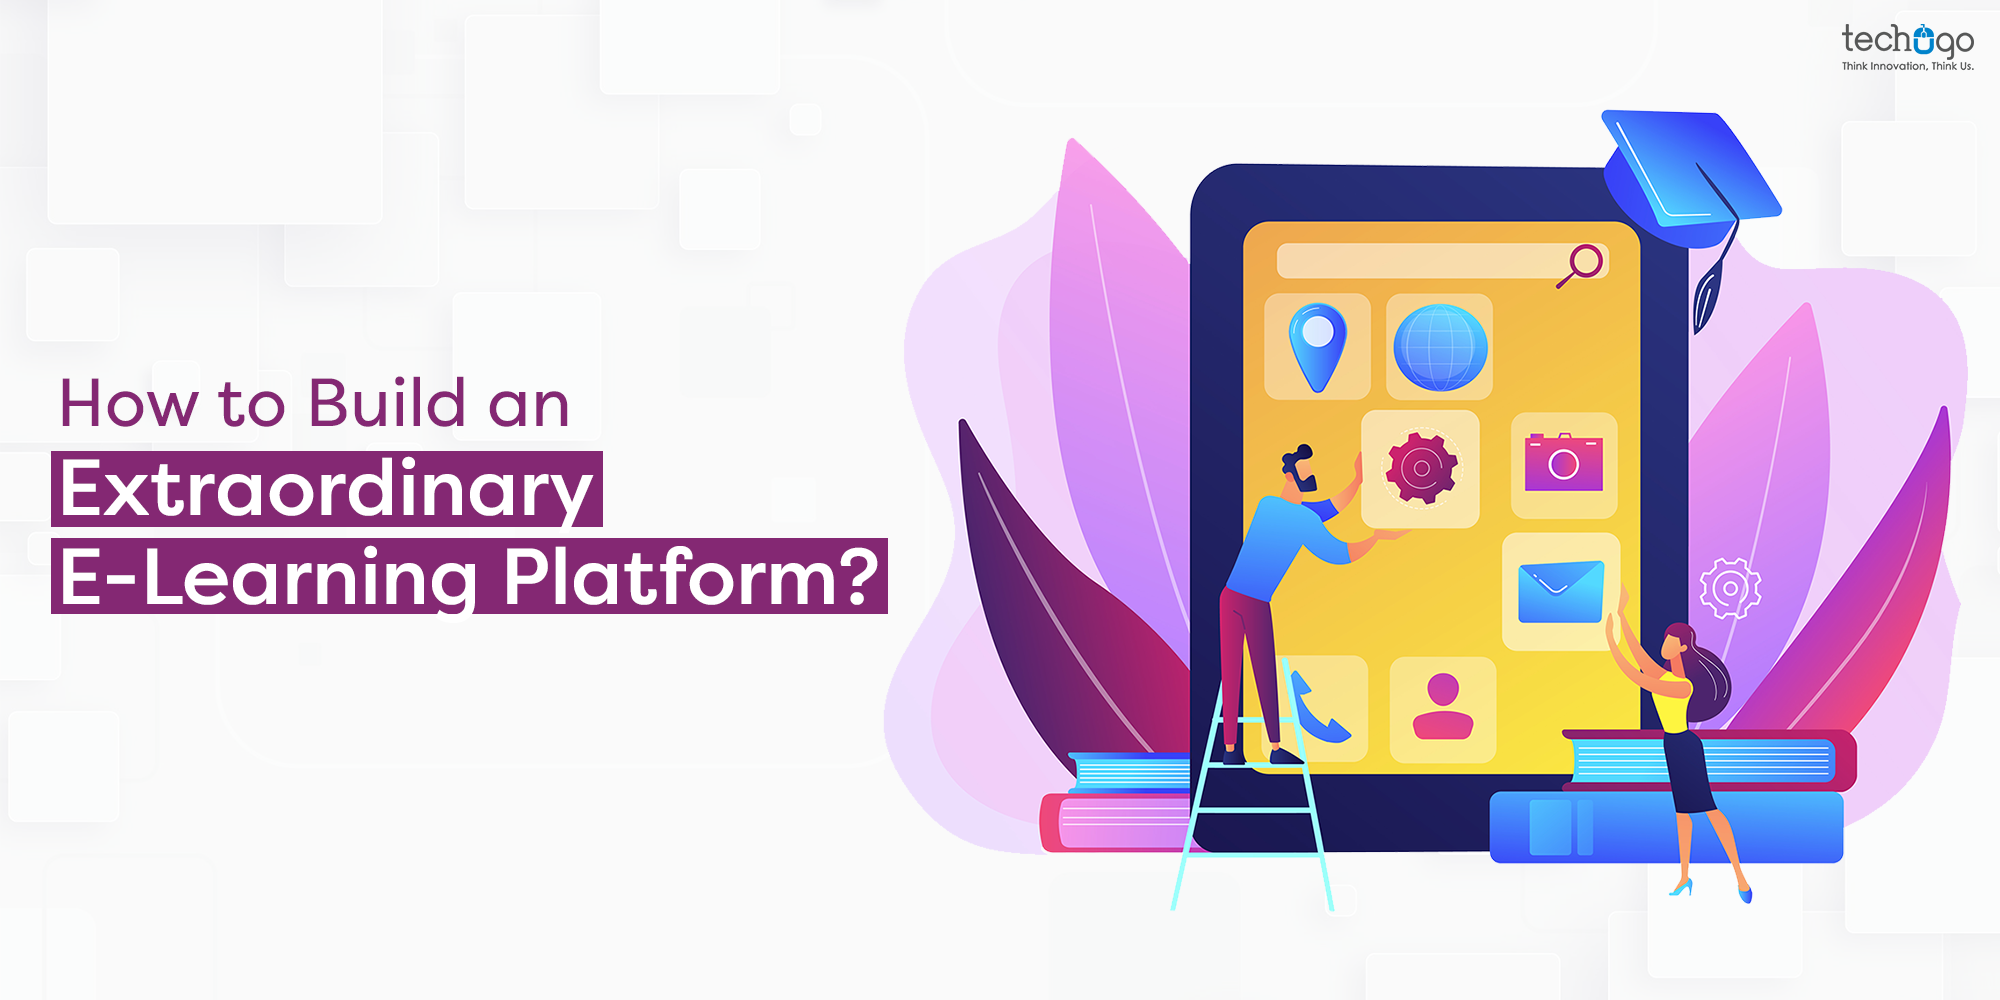 How to Build an Extraordinary E-Learning Platform?